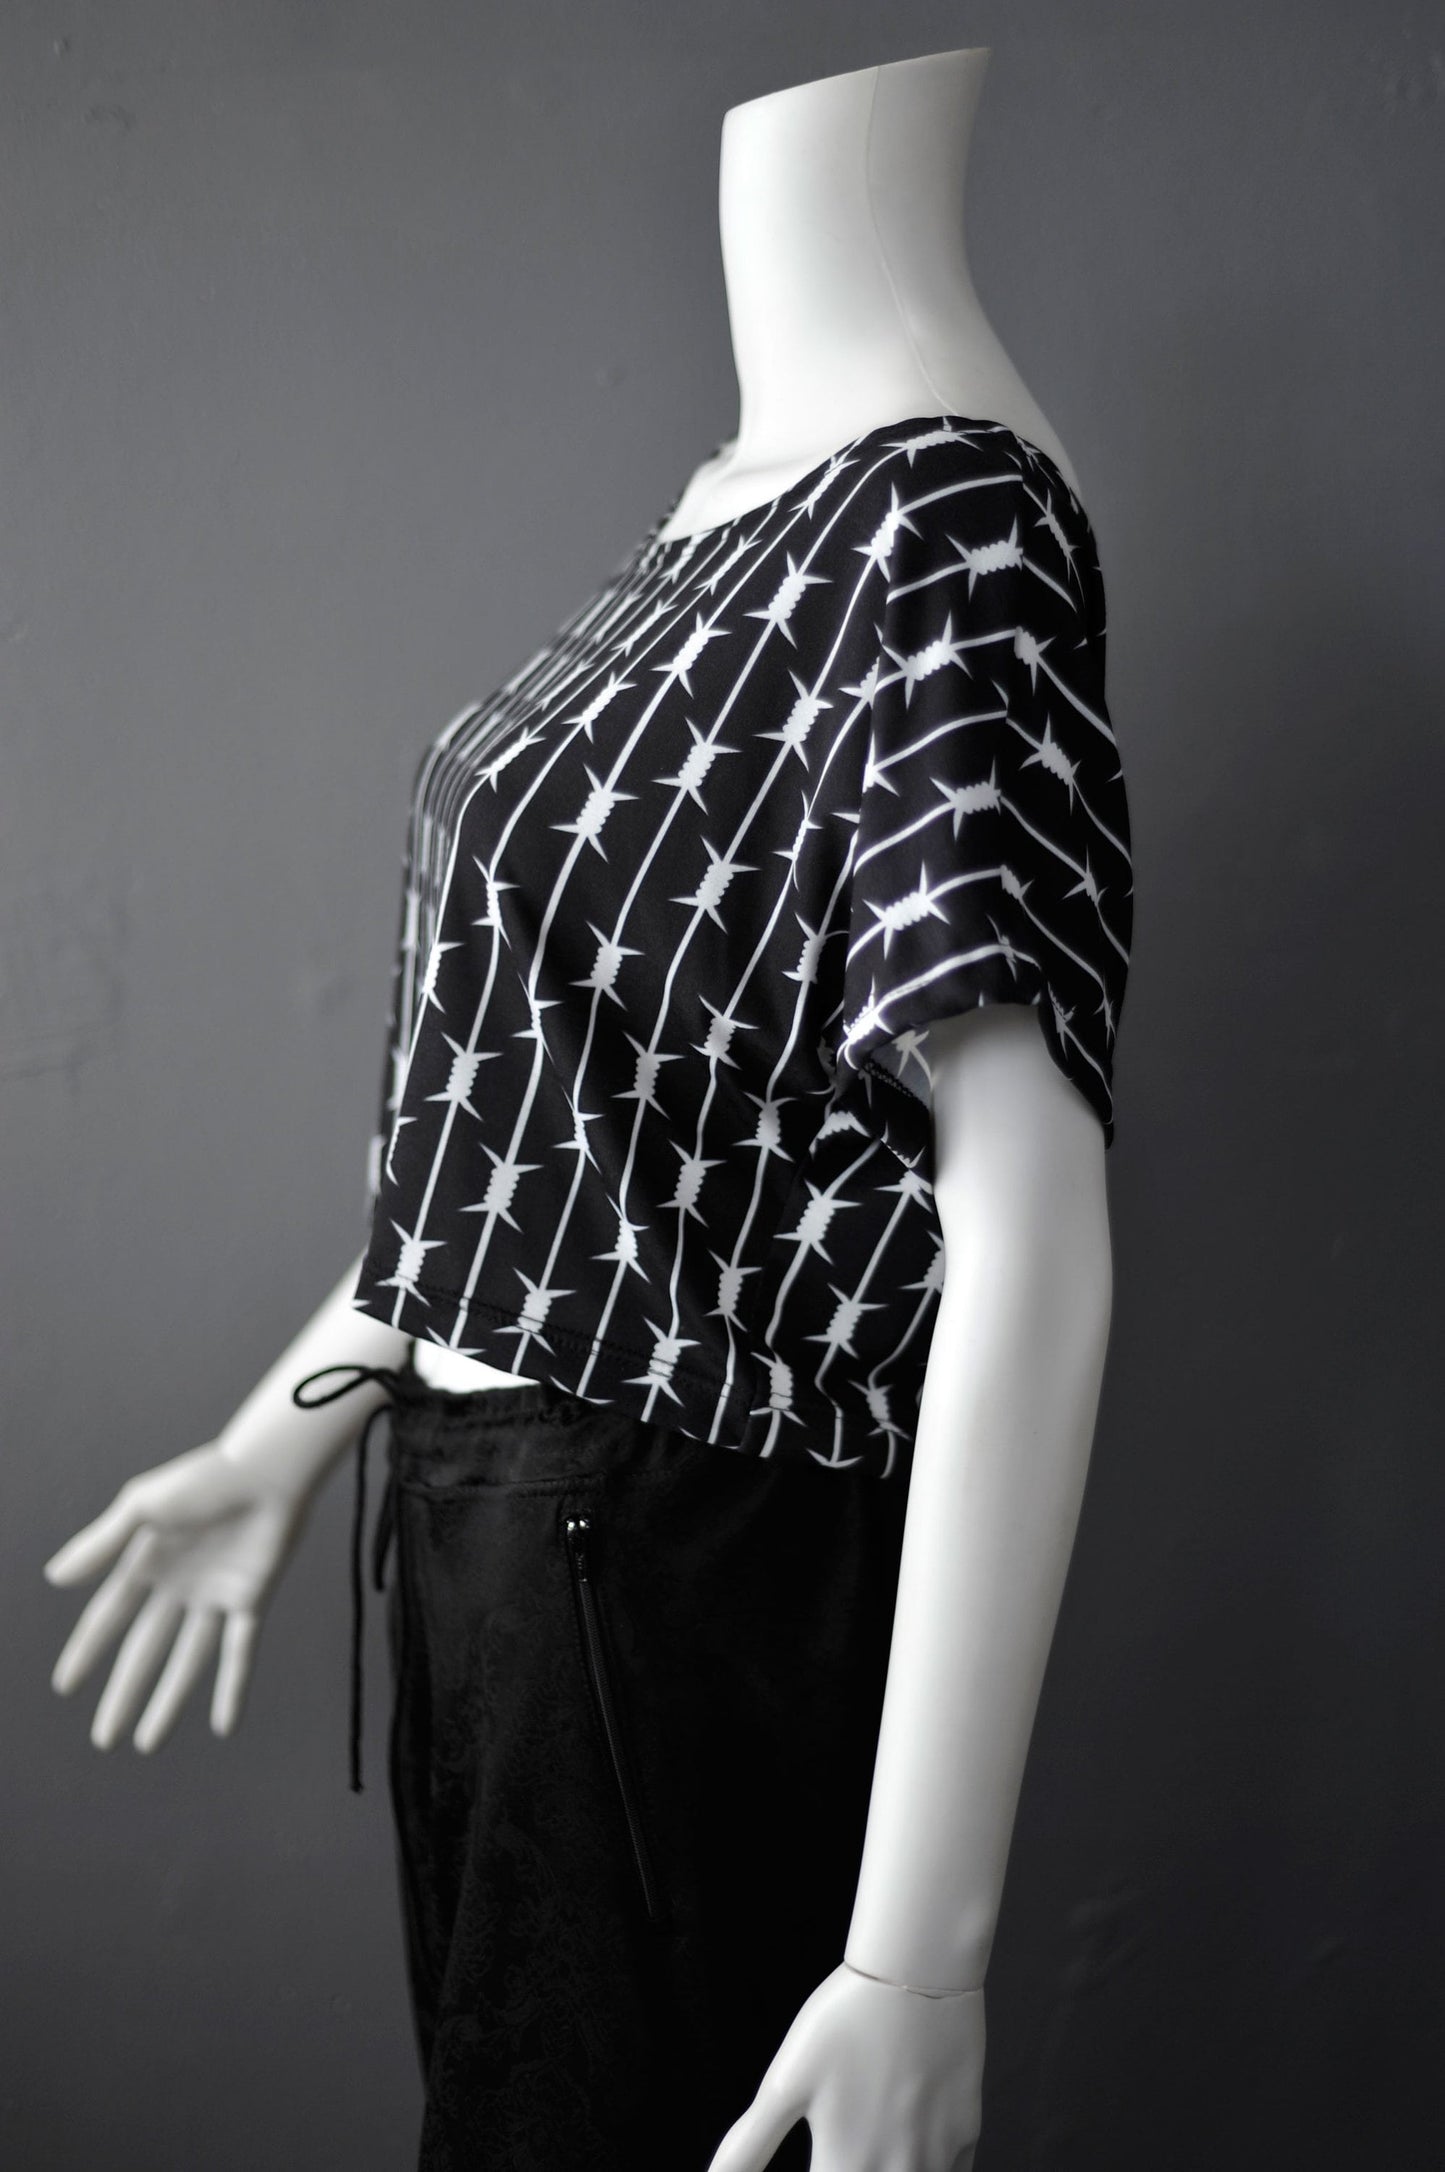 Oversized Crop Top with Barbed Wire Print, Unisex Gothic Tshirt